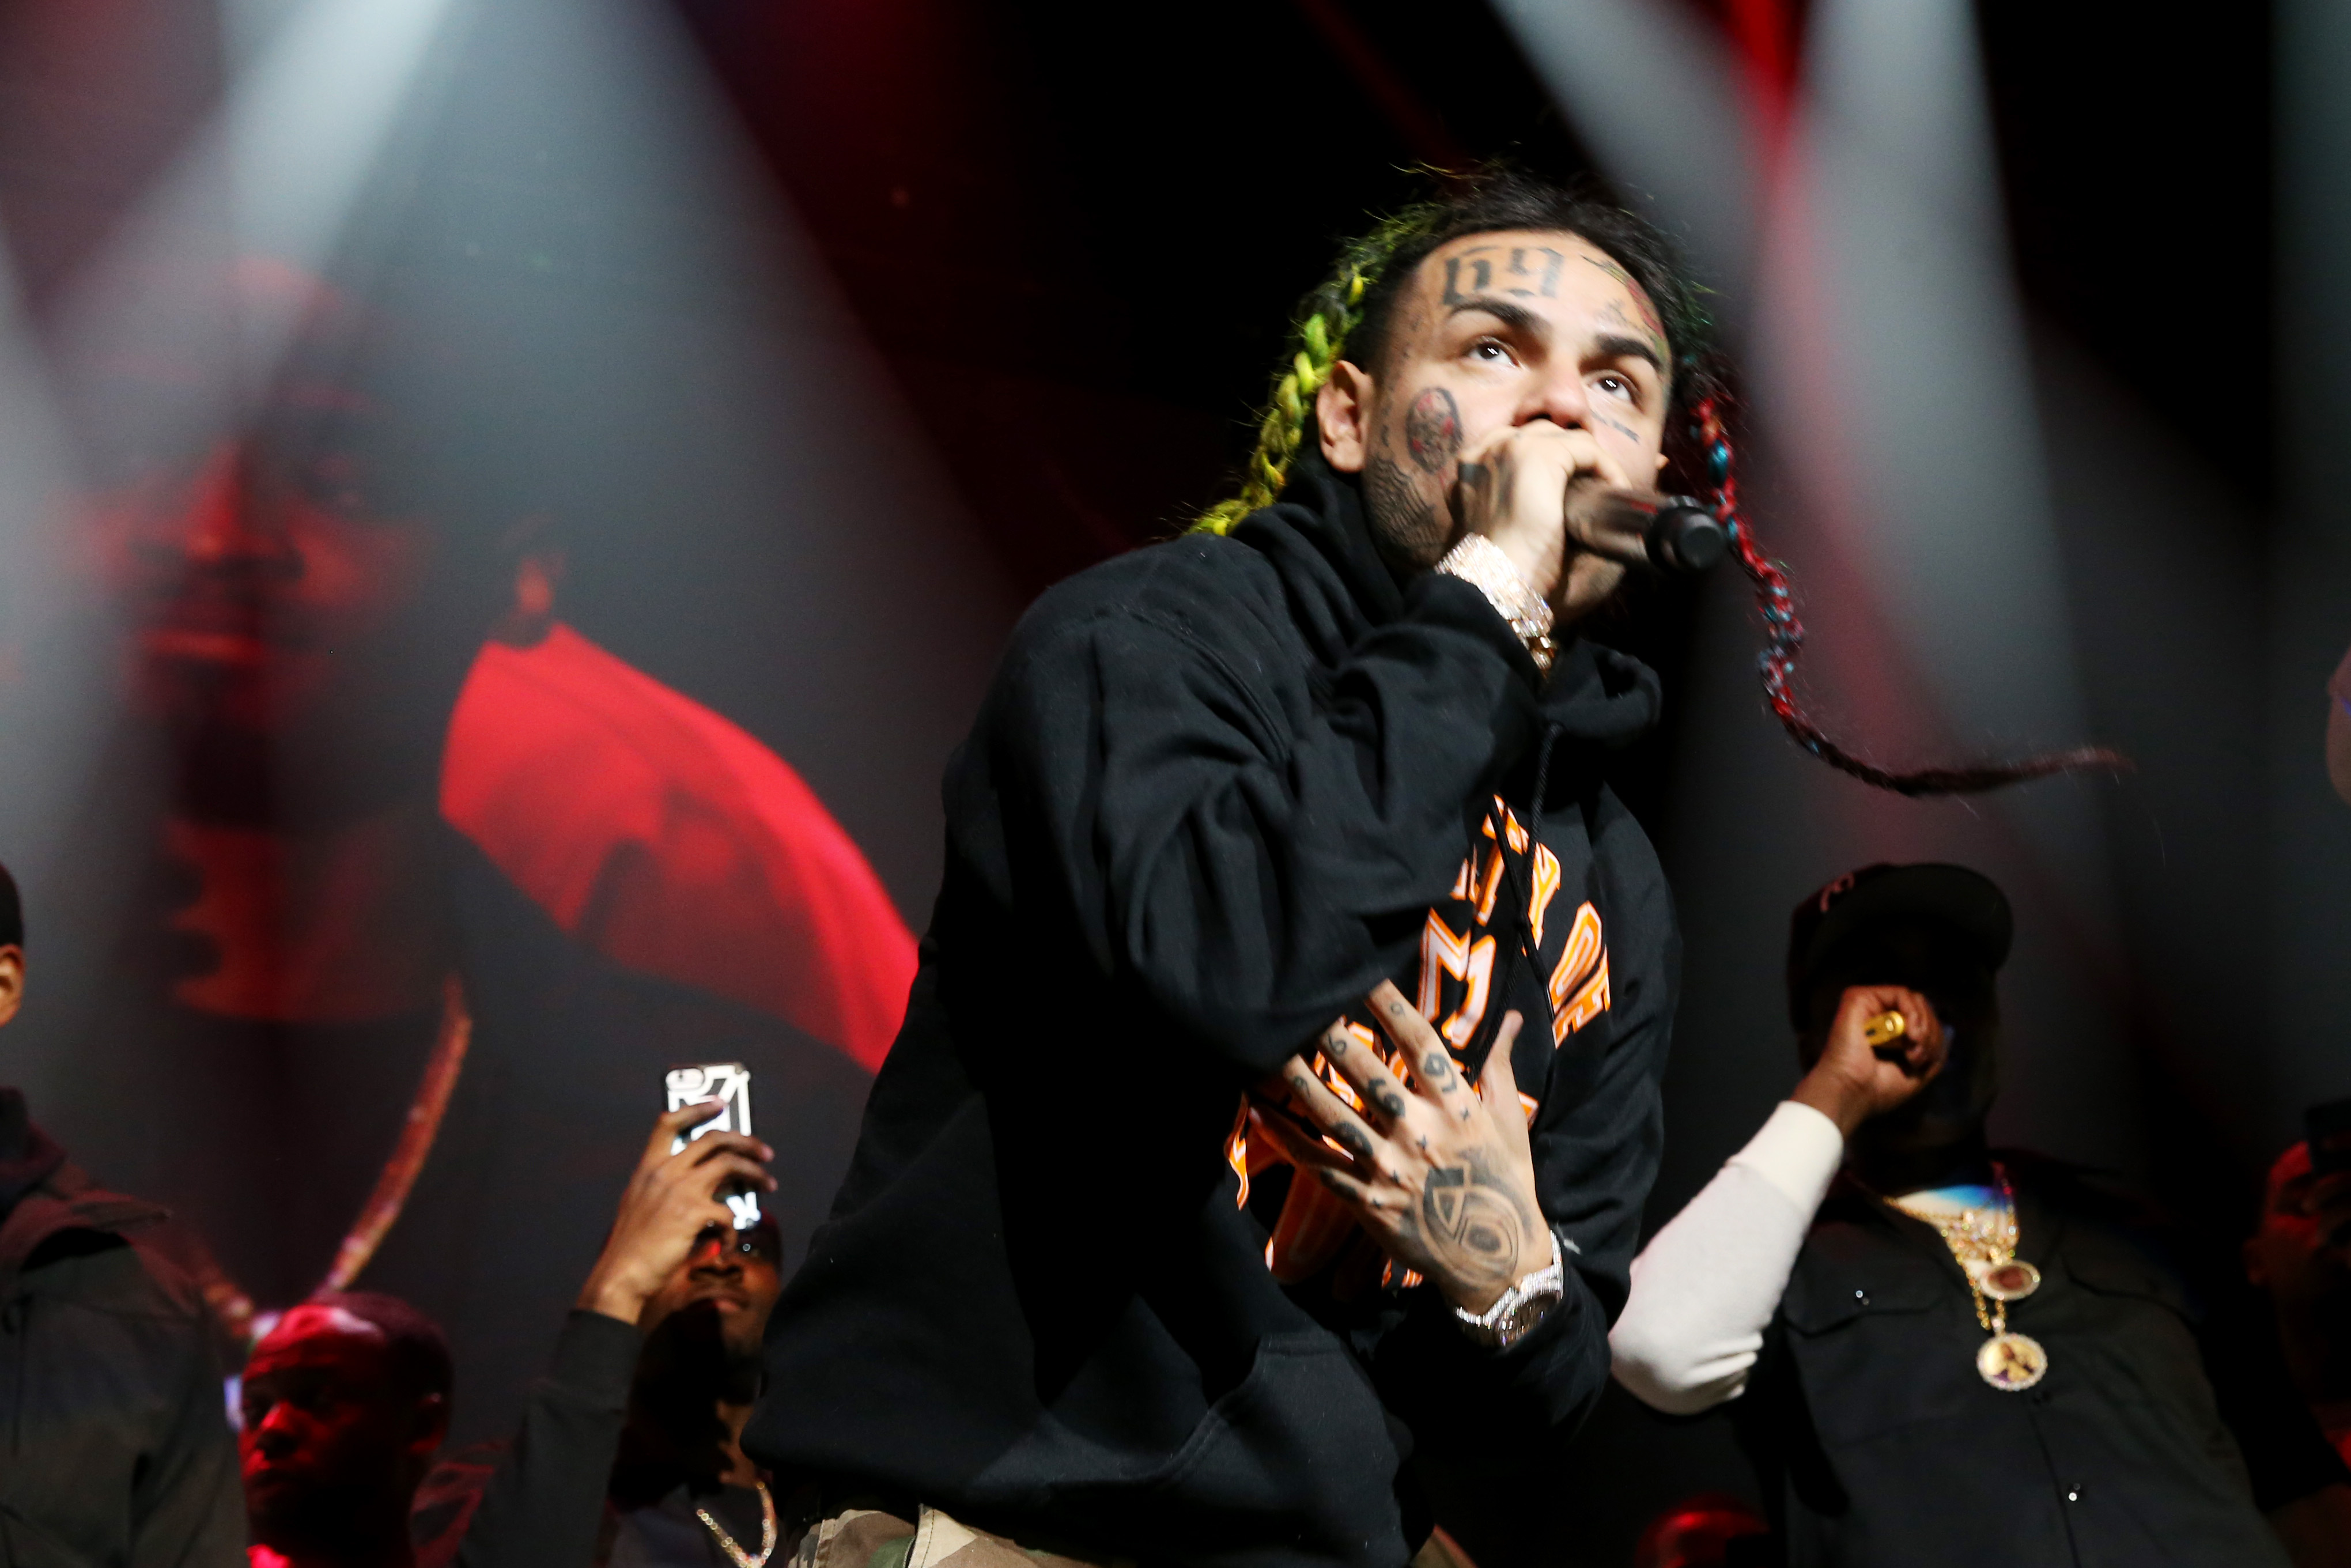 6ix9ine Forces Strangers To Take His Album After Underwhelming Sales